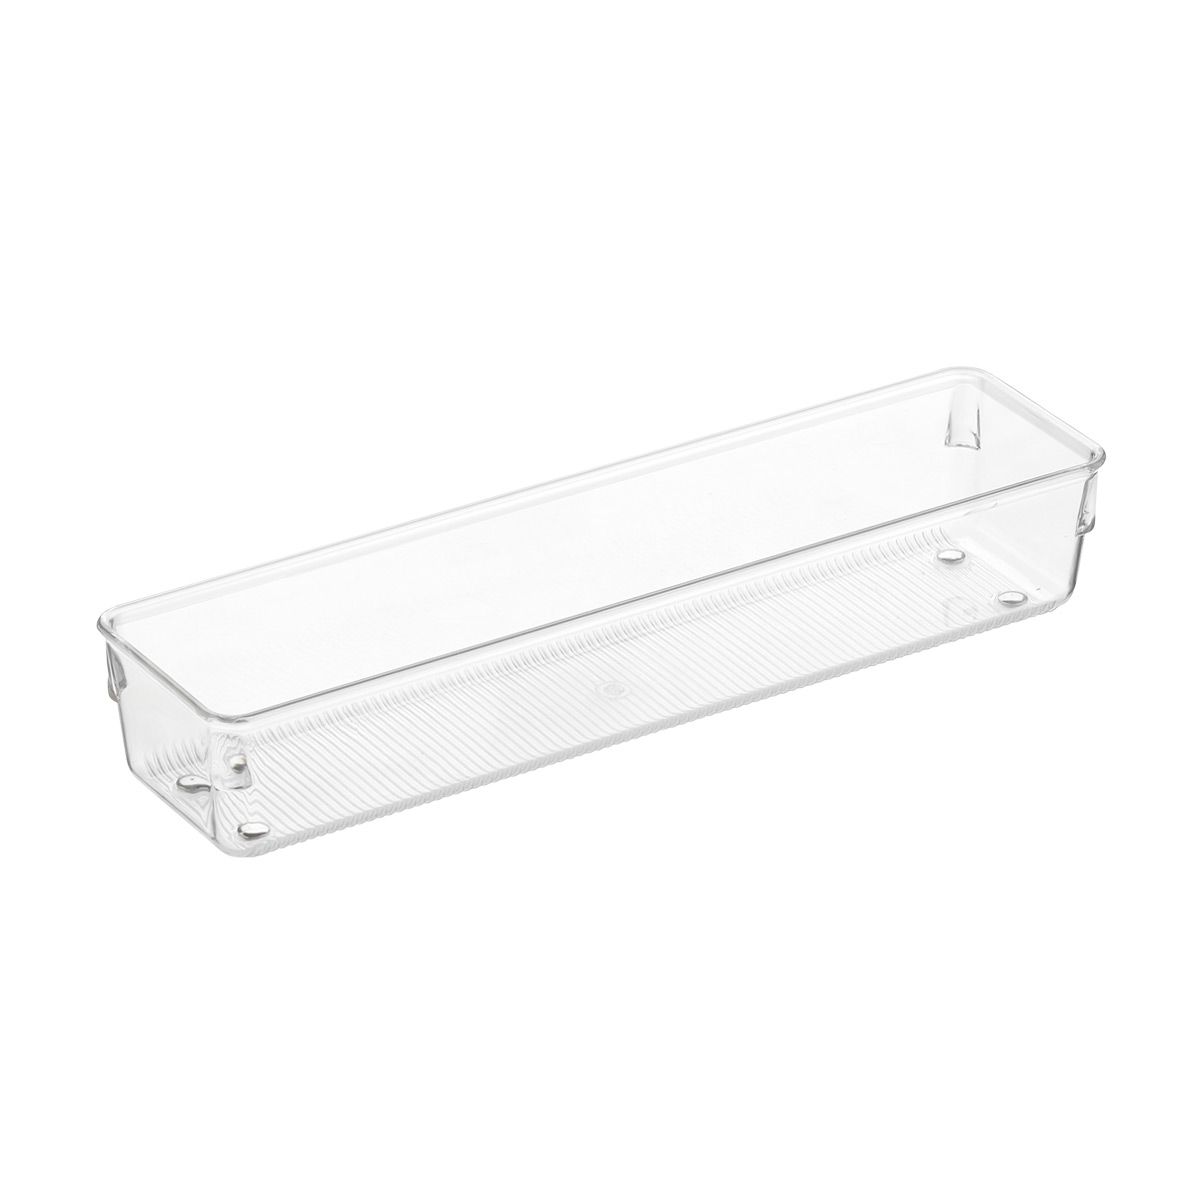 Shallow Drawer Organizer | The Container Store